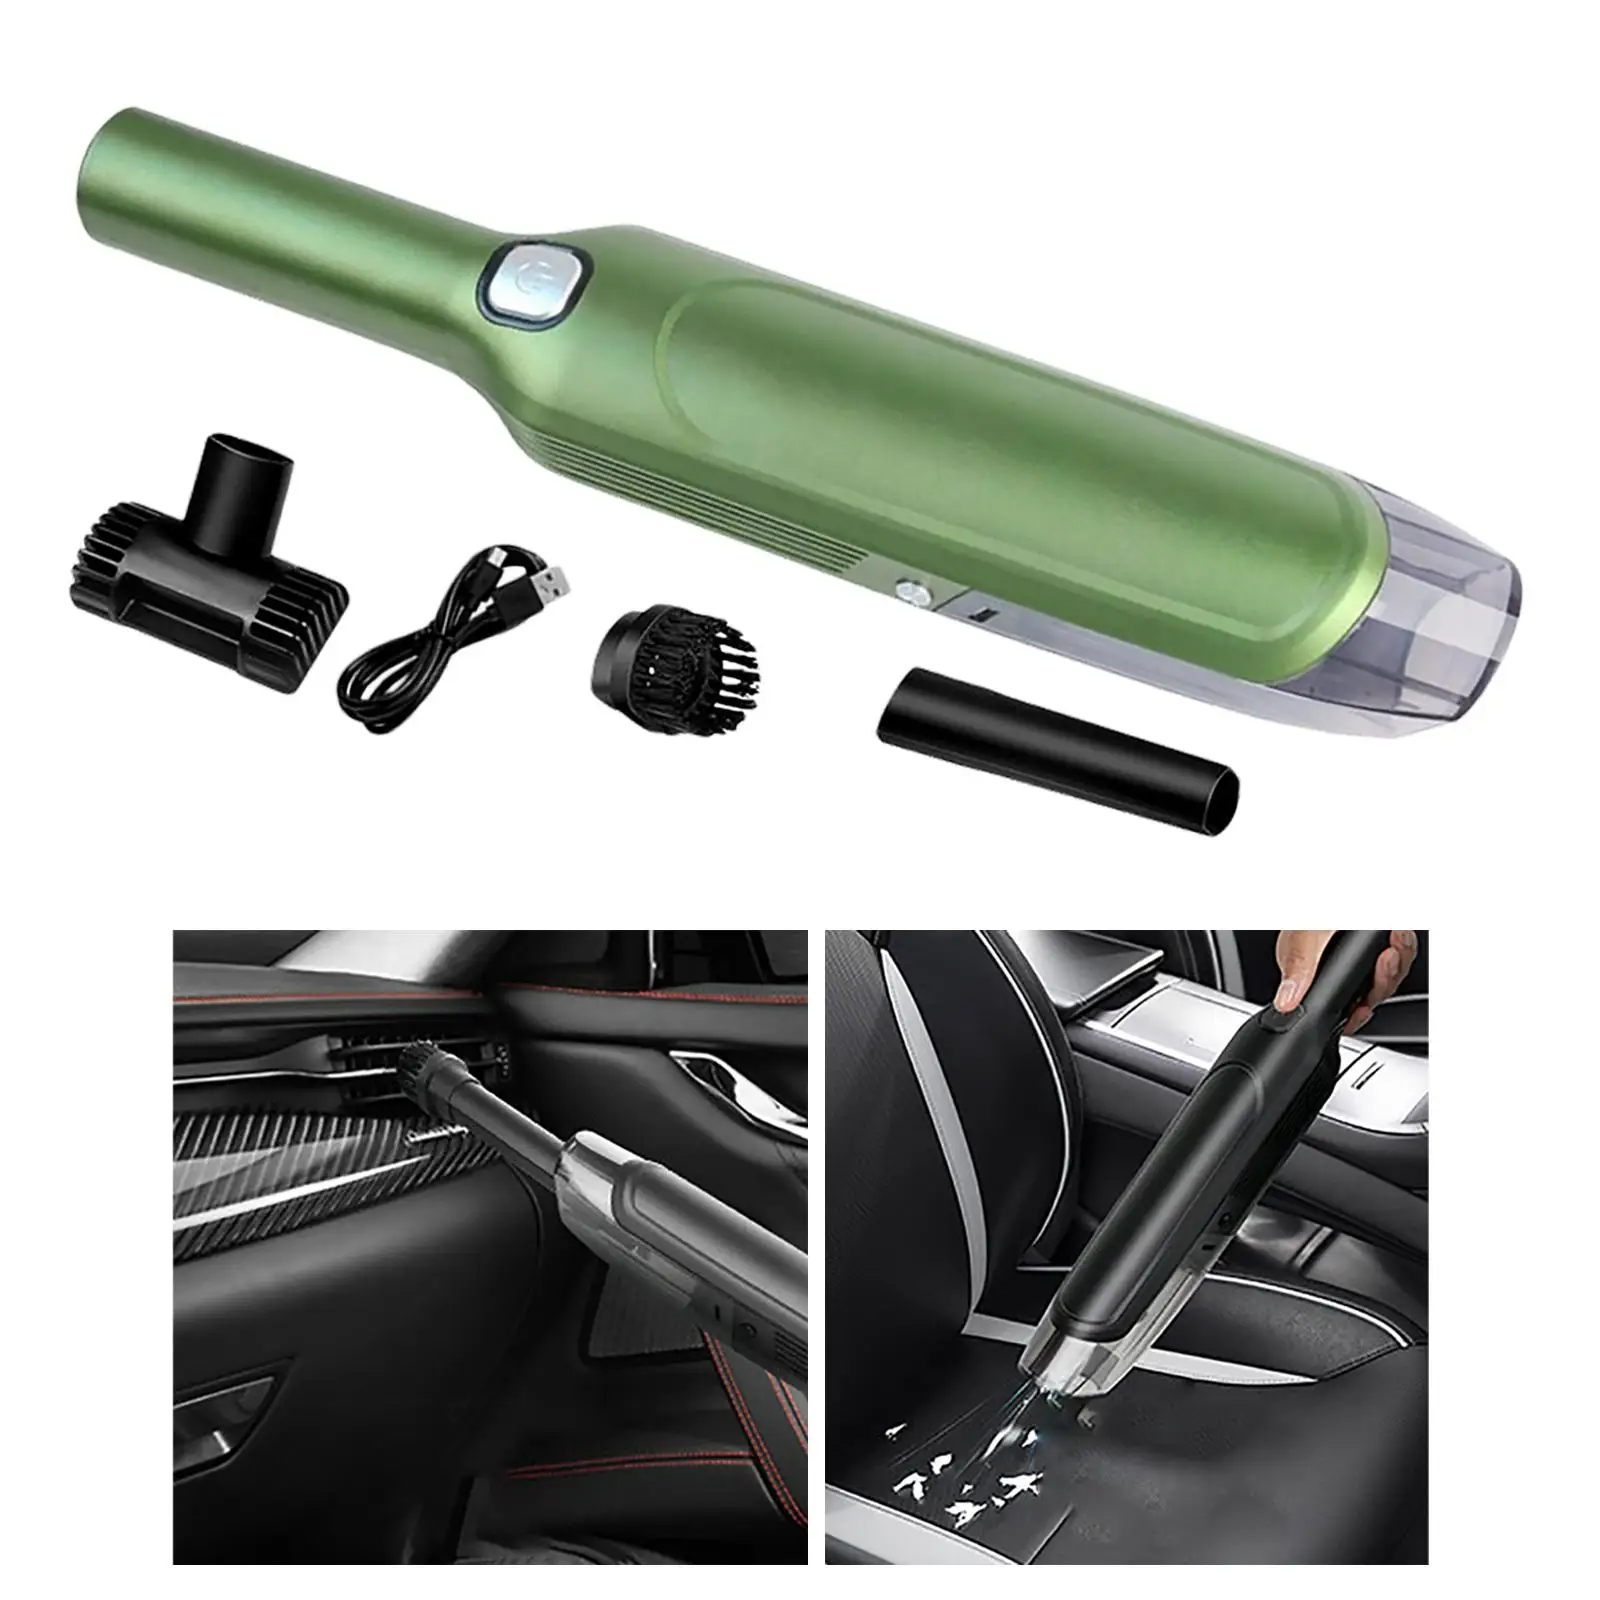  Car Vacuum Cleaner 8000PA Suction Mini Washable 120W Portable Handheld Vacuum for Car Crevices  Charge